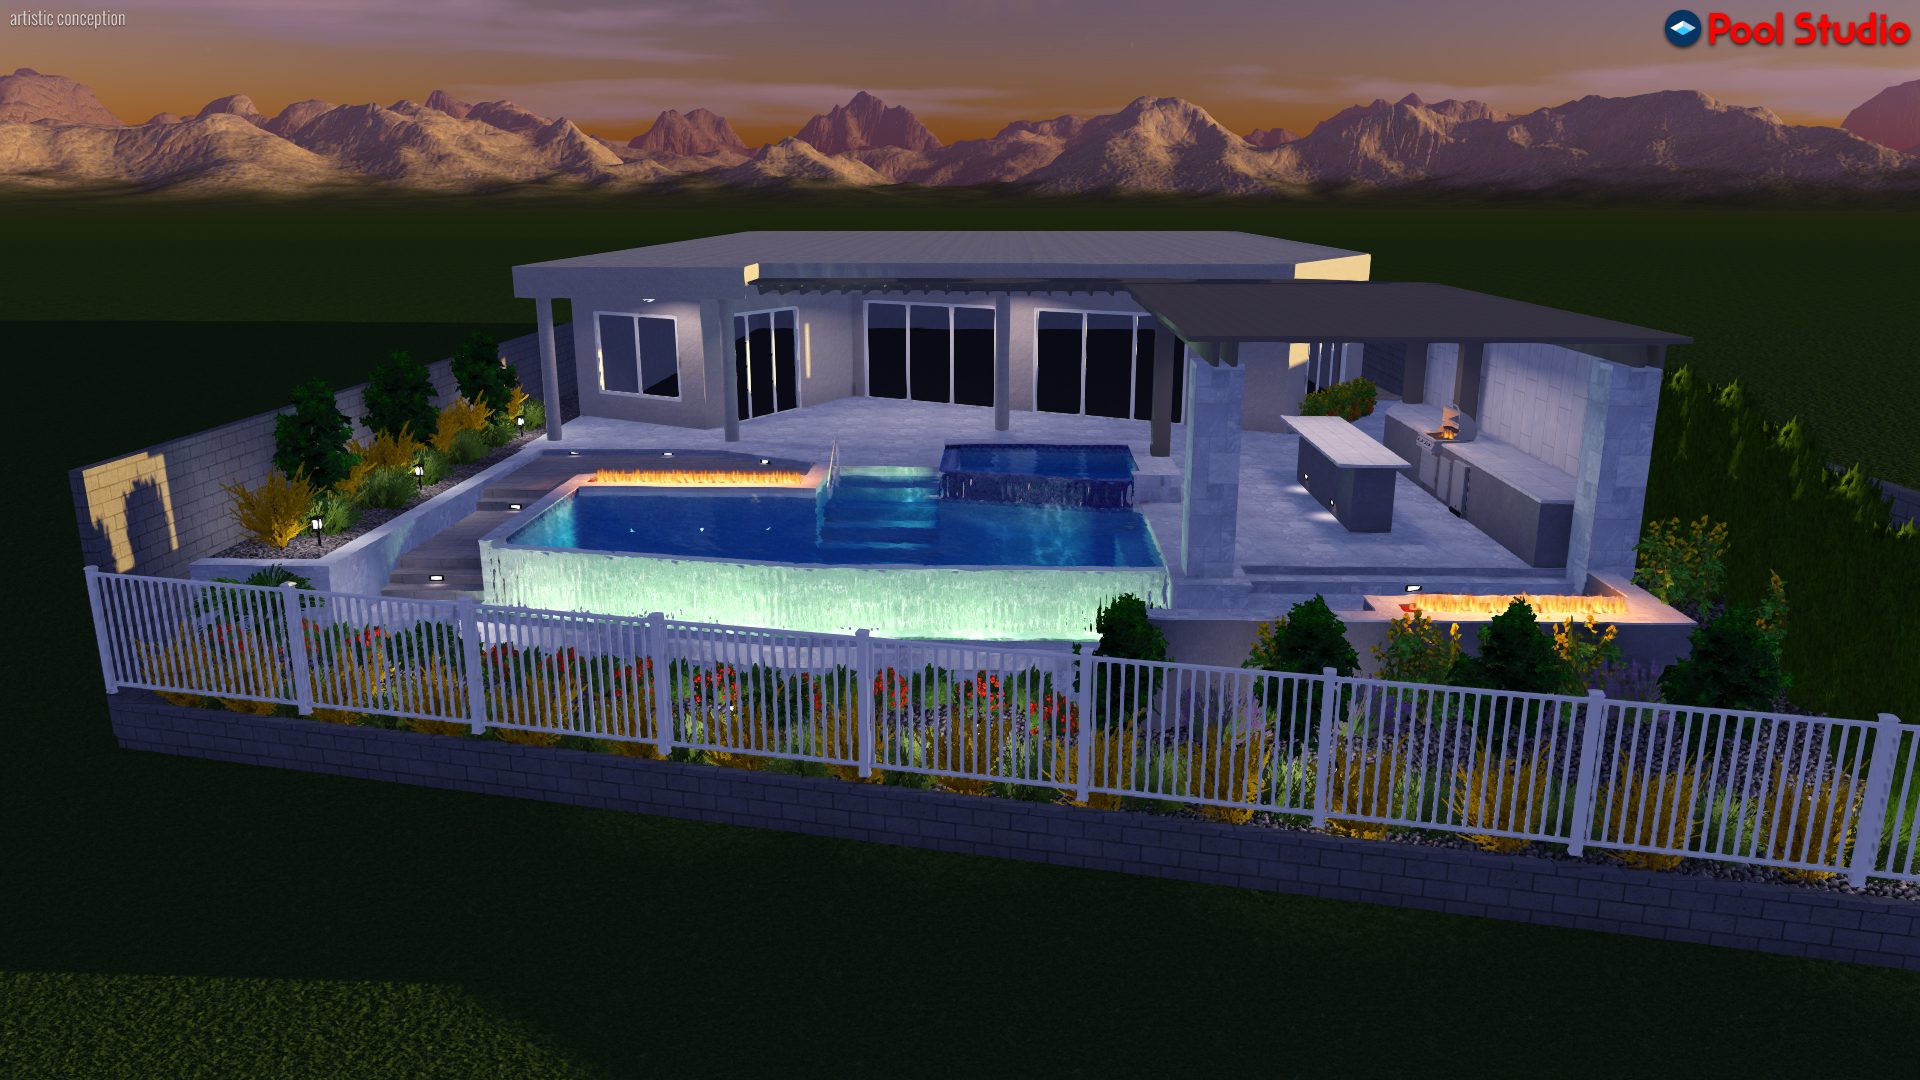 A 3 d rendering of an outdoor pool area.